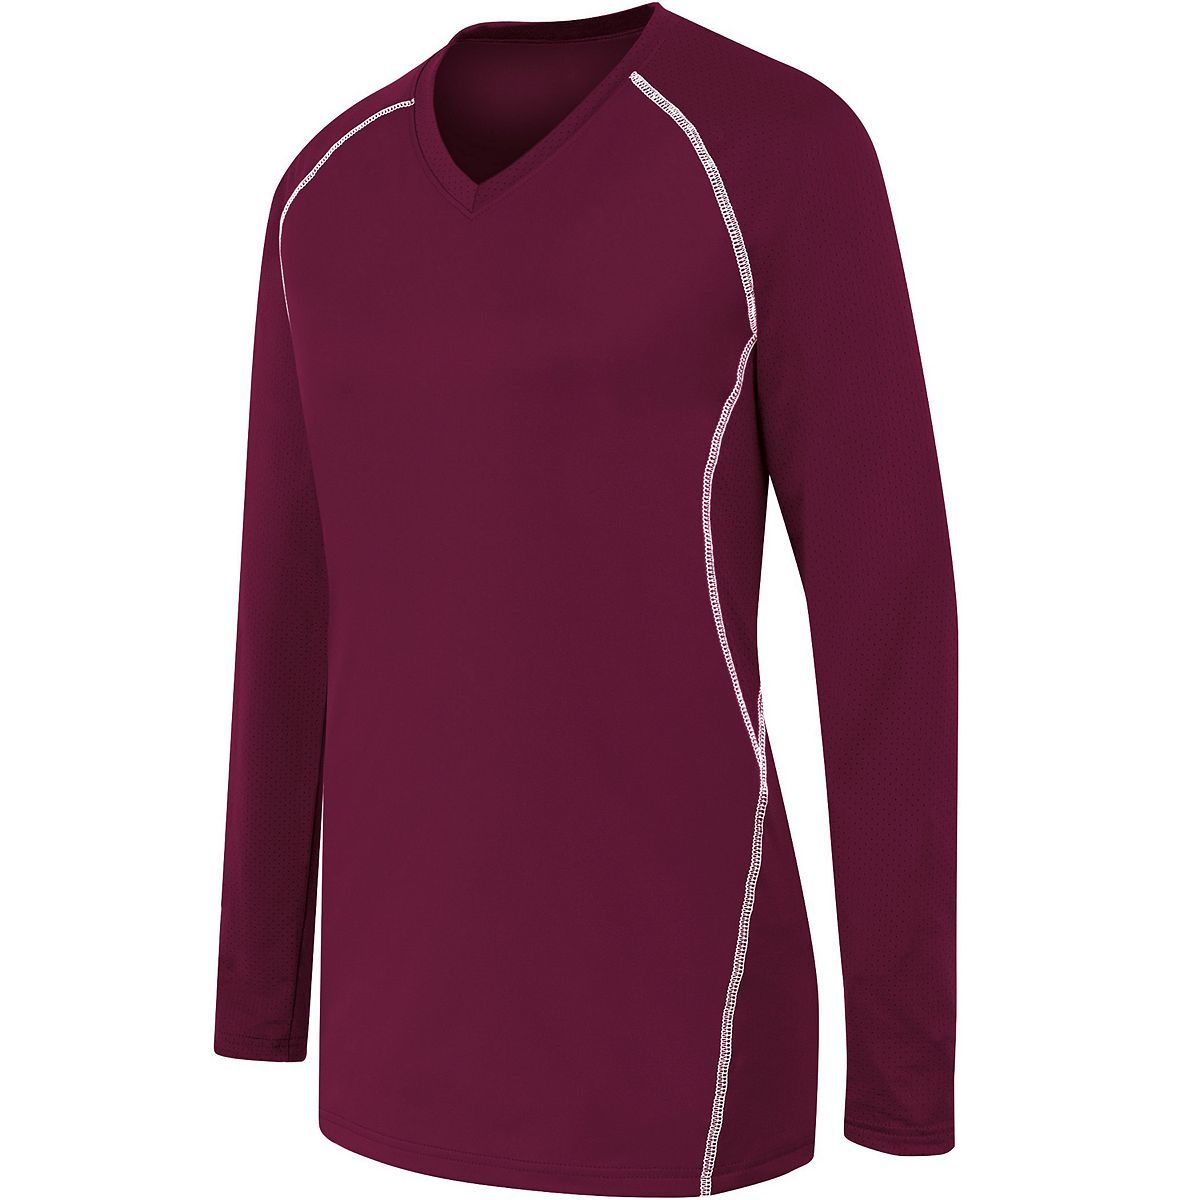 High 5 Ladies Long Sleeve Solid Jersey in Maroon/White  -Part of the Ladies, Ladies-Jersey, High5-Products, Volleyball, Shirts product lines at KanaleyCreations.com